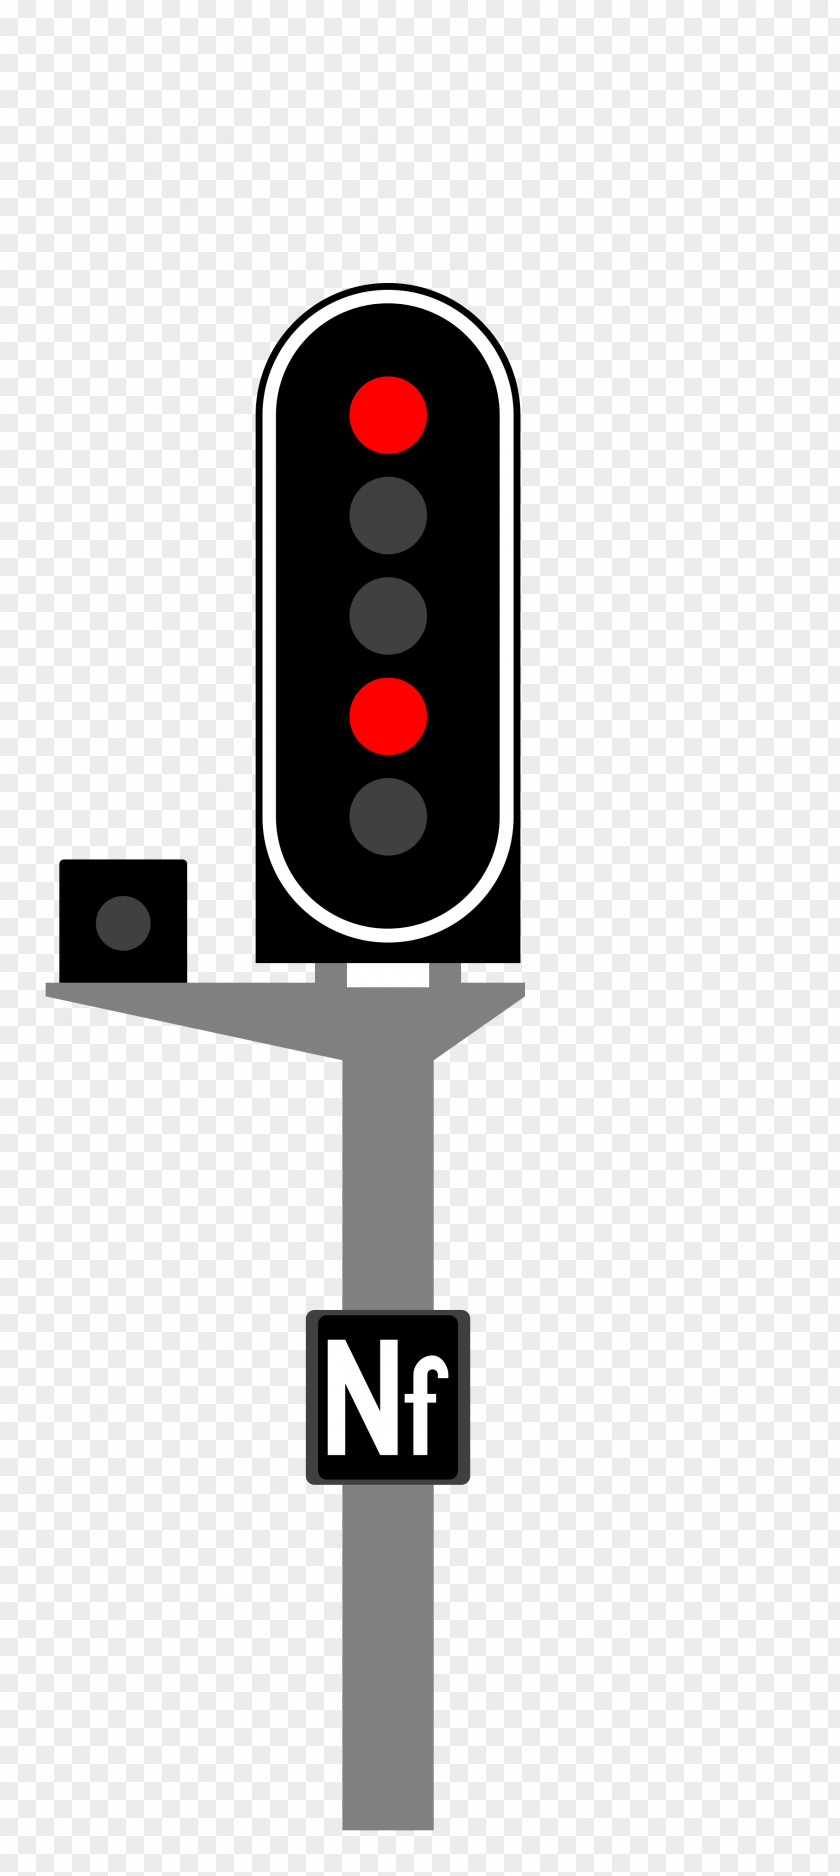 Train French Railway Signalling Carré Semaphore Signal PNG